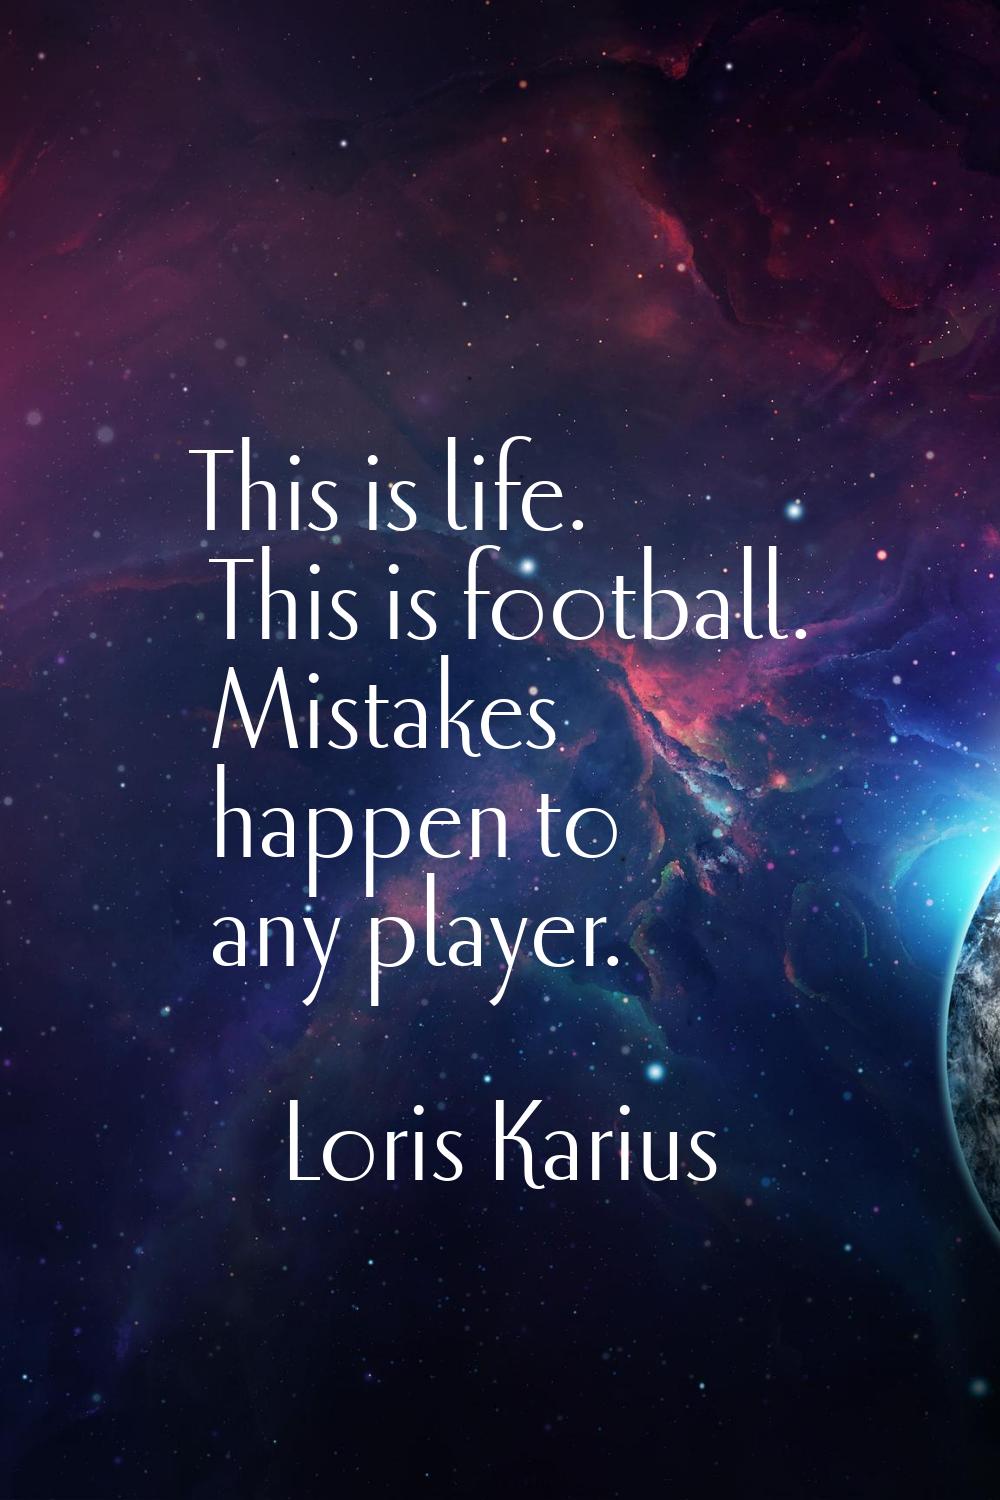 This is life. This is football. Mistakes happen to any player.